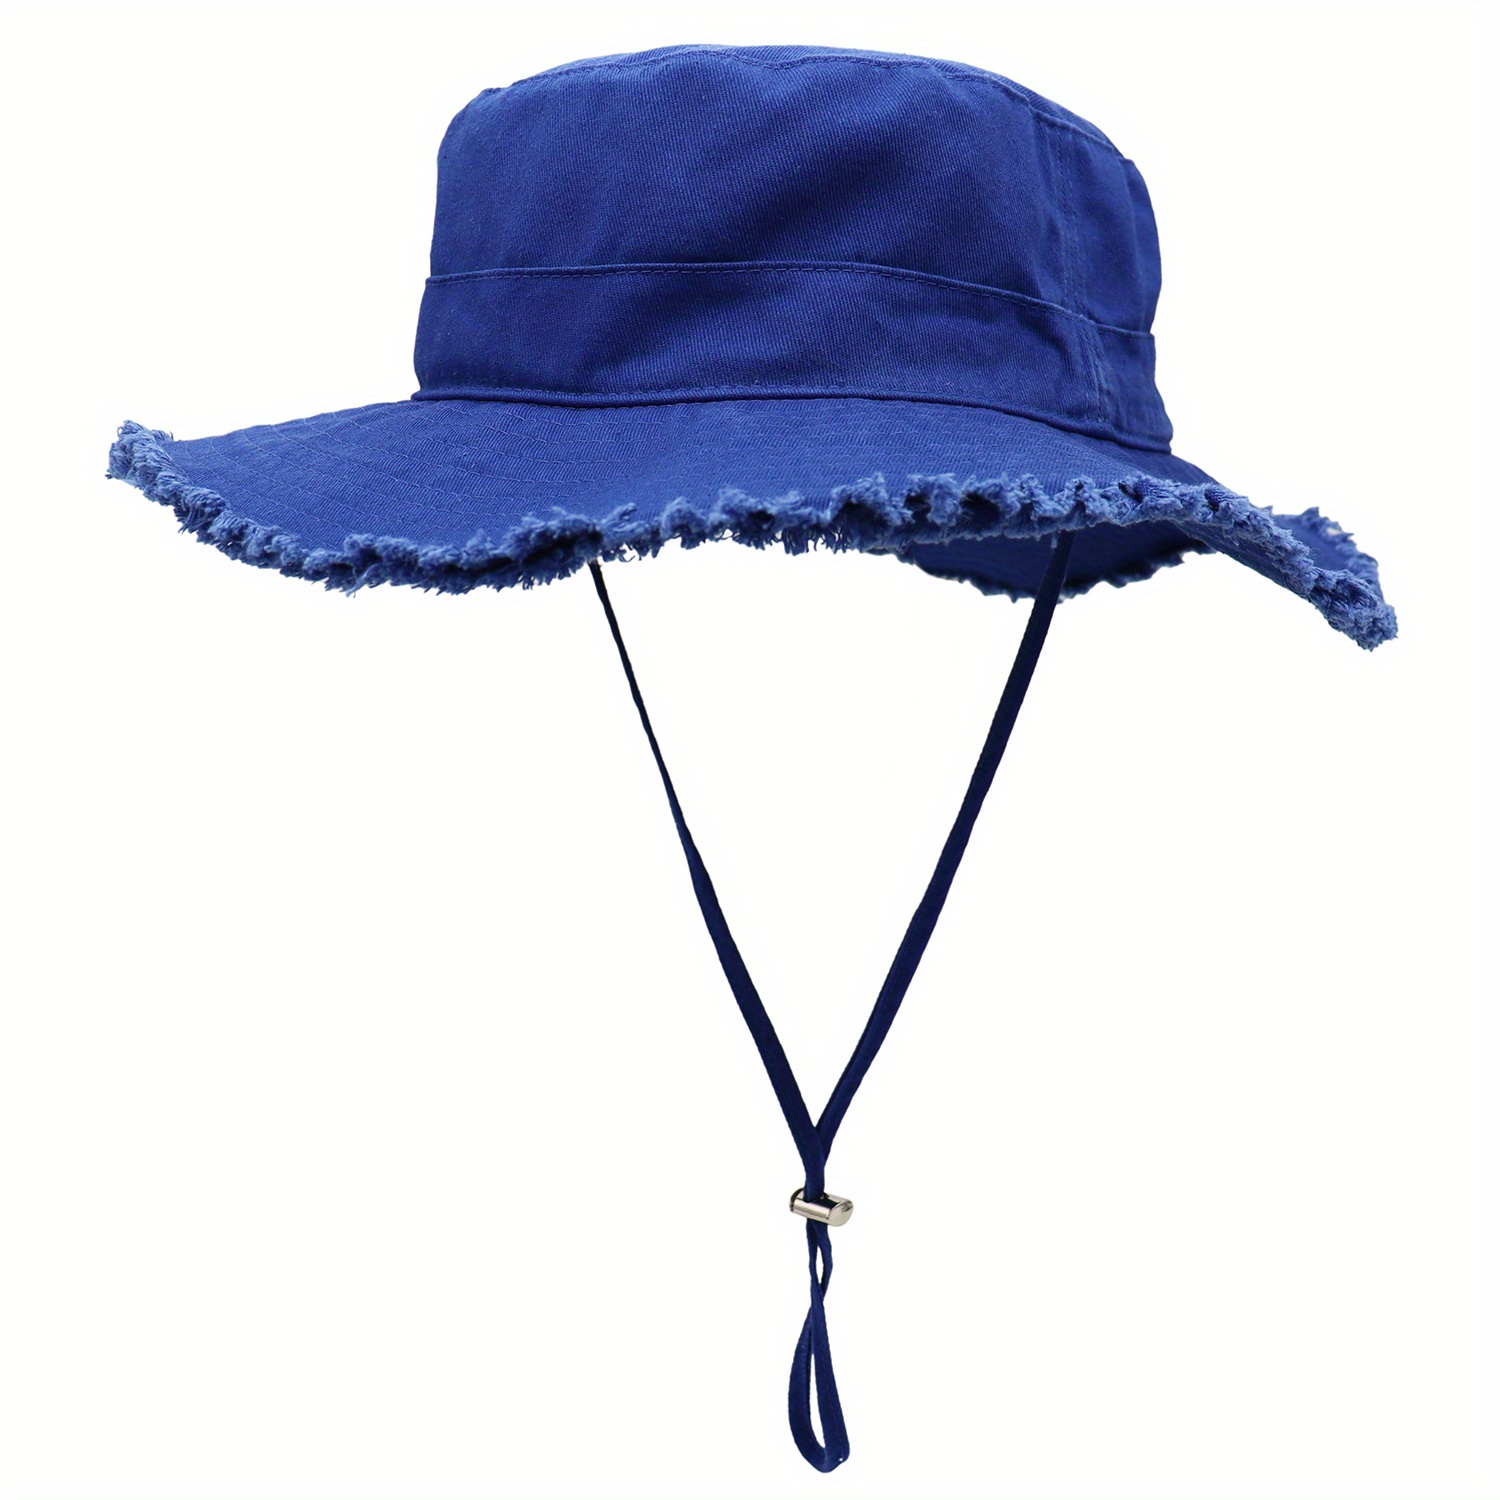 Men's Outdoor Wide Brim Sun Hat With Adjustable Draw String, Cotton Edge Made Vintage Fishing Hat With Assorted Colors